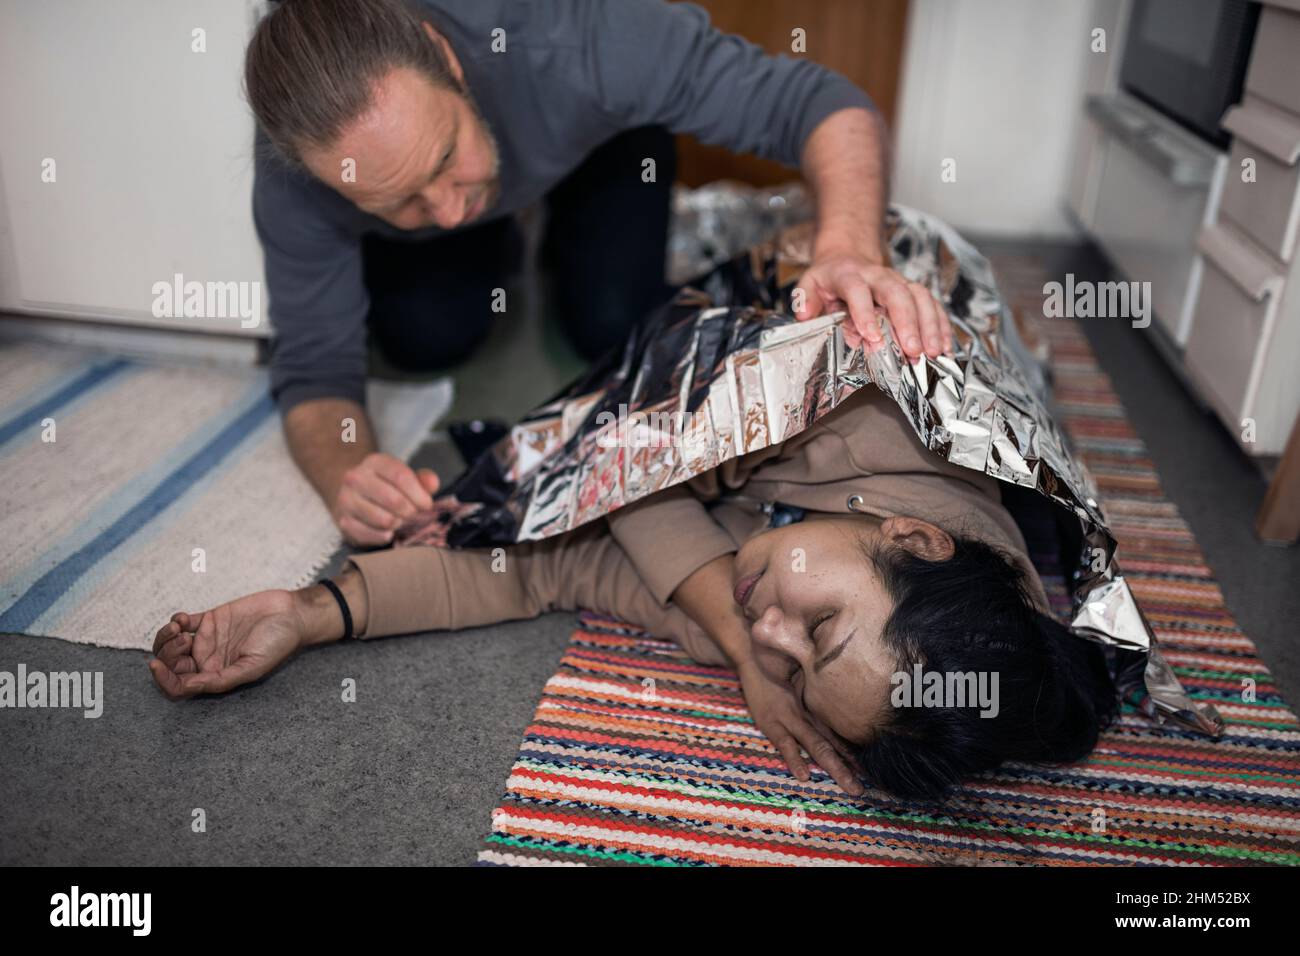 Man taking care of unconscious woman in medical shock Stock Photo